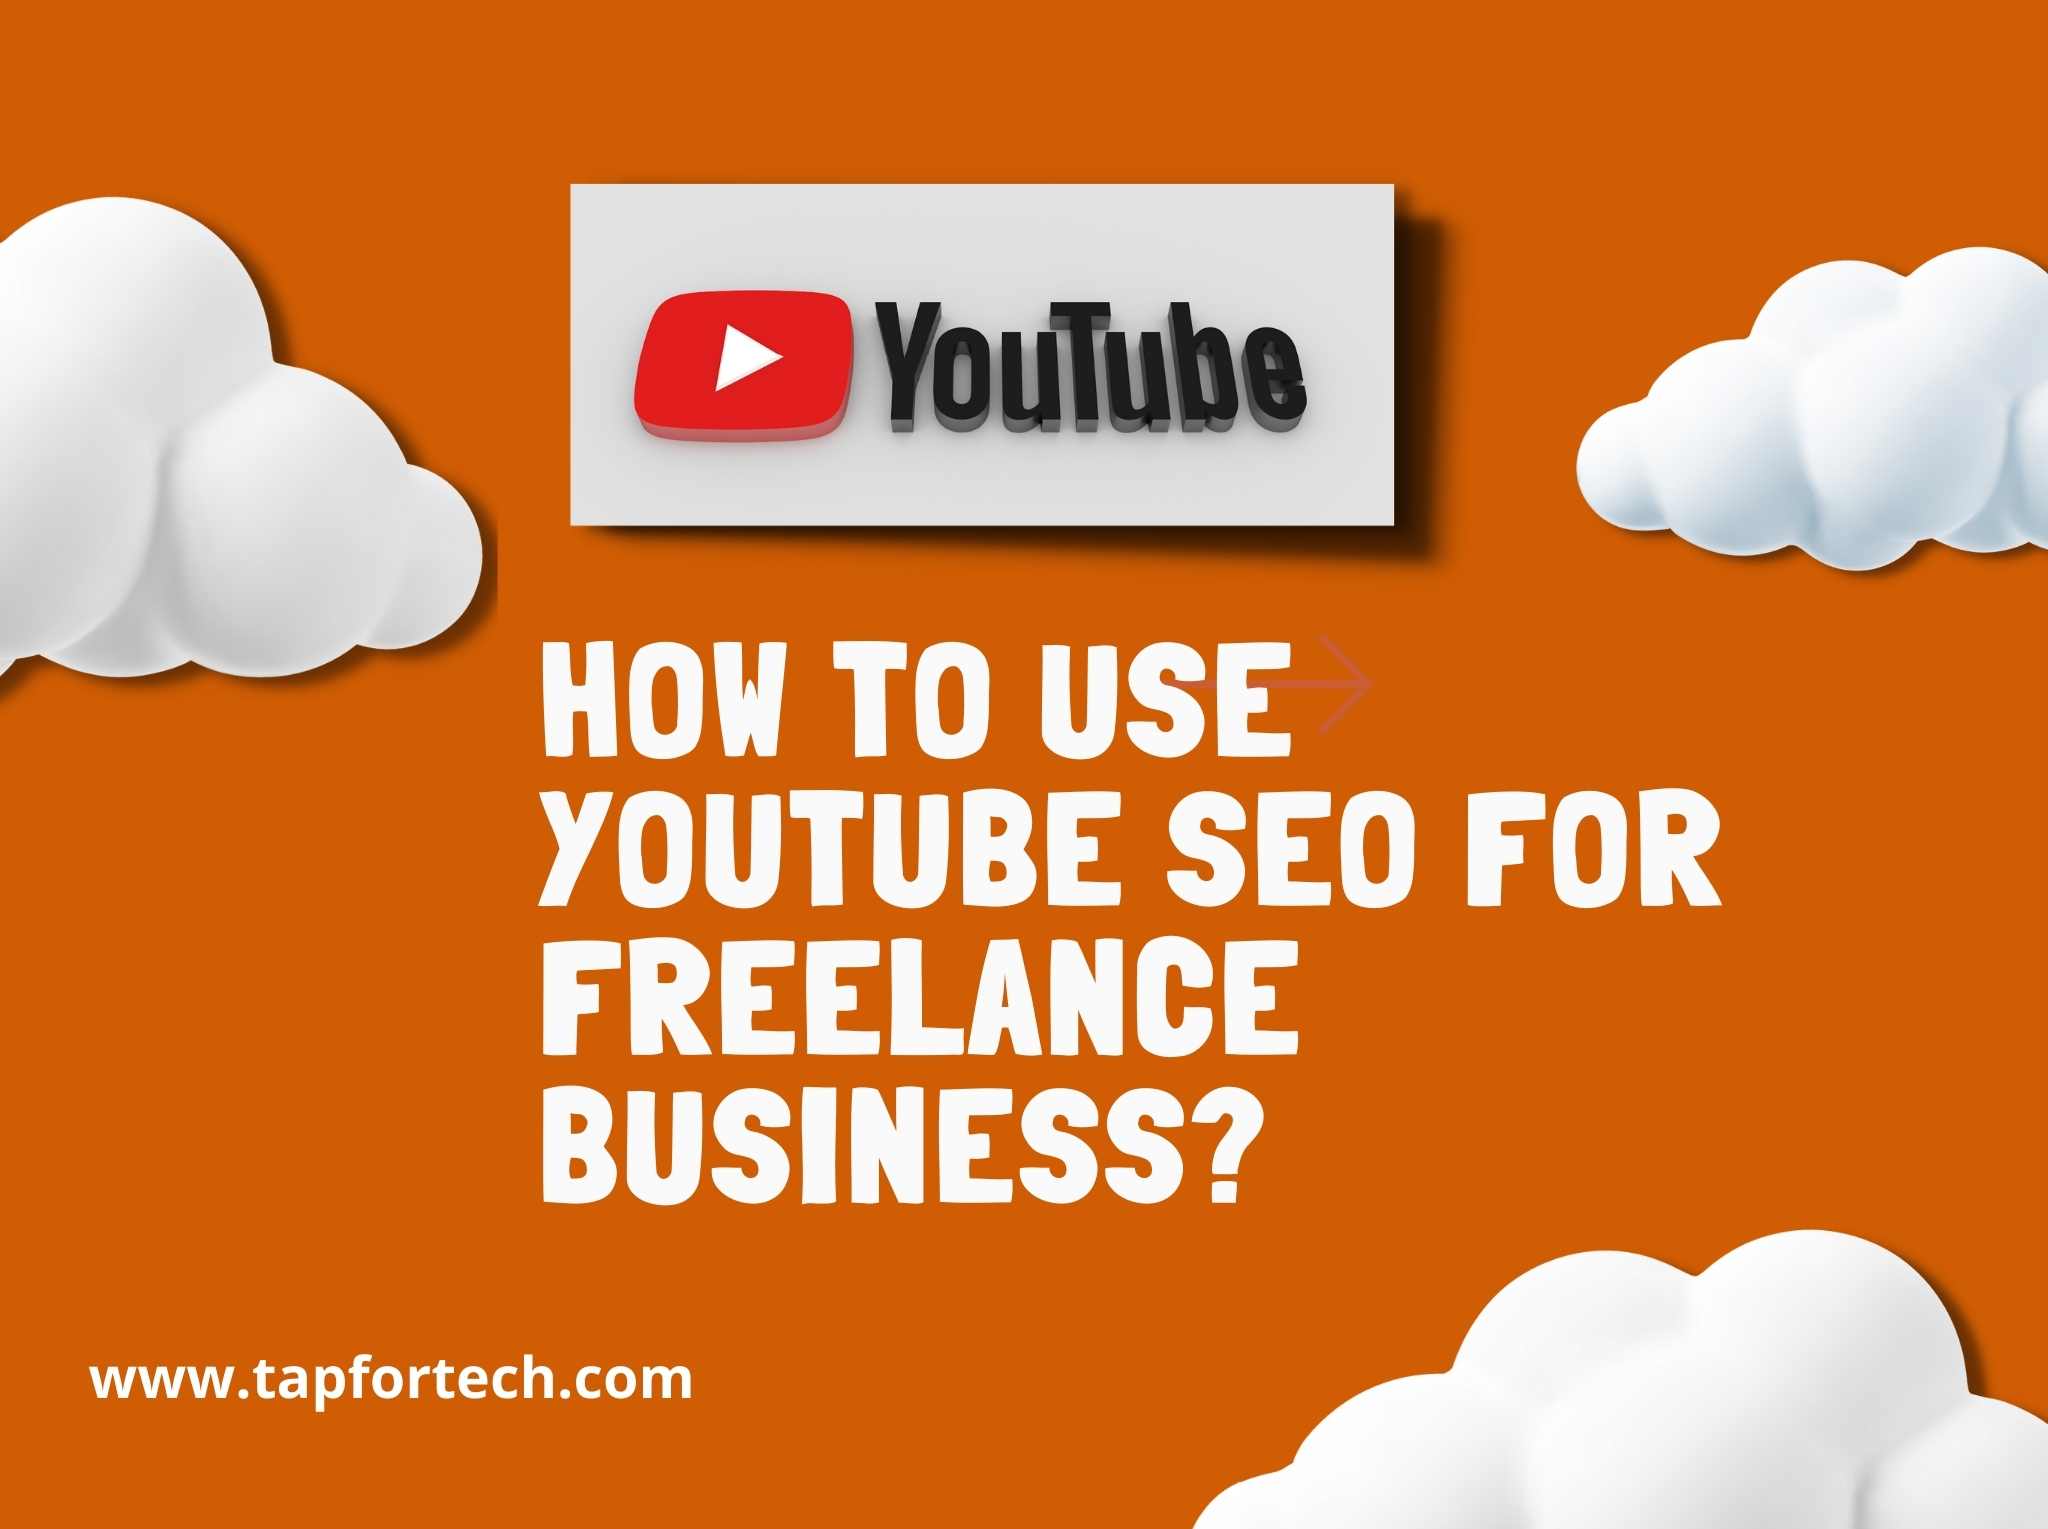 How To Use Youtube SEO For Freelance Business?